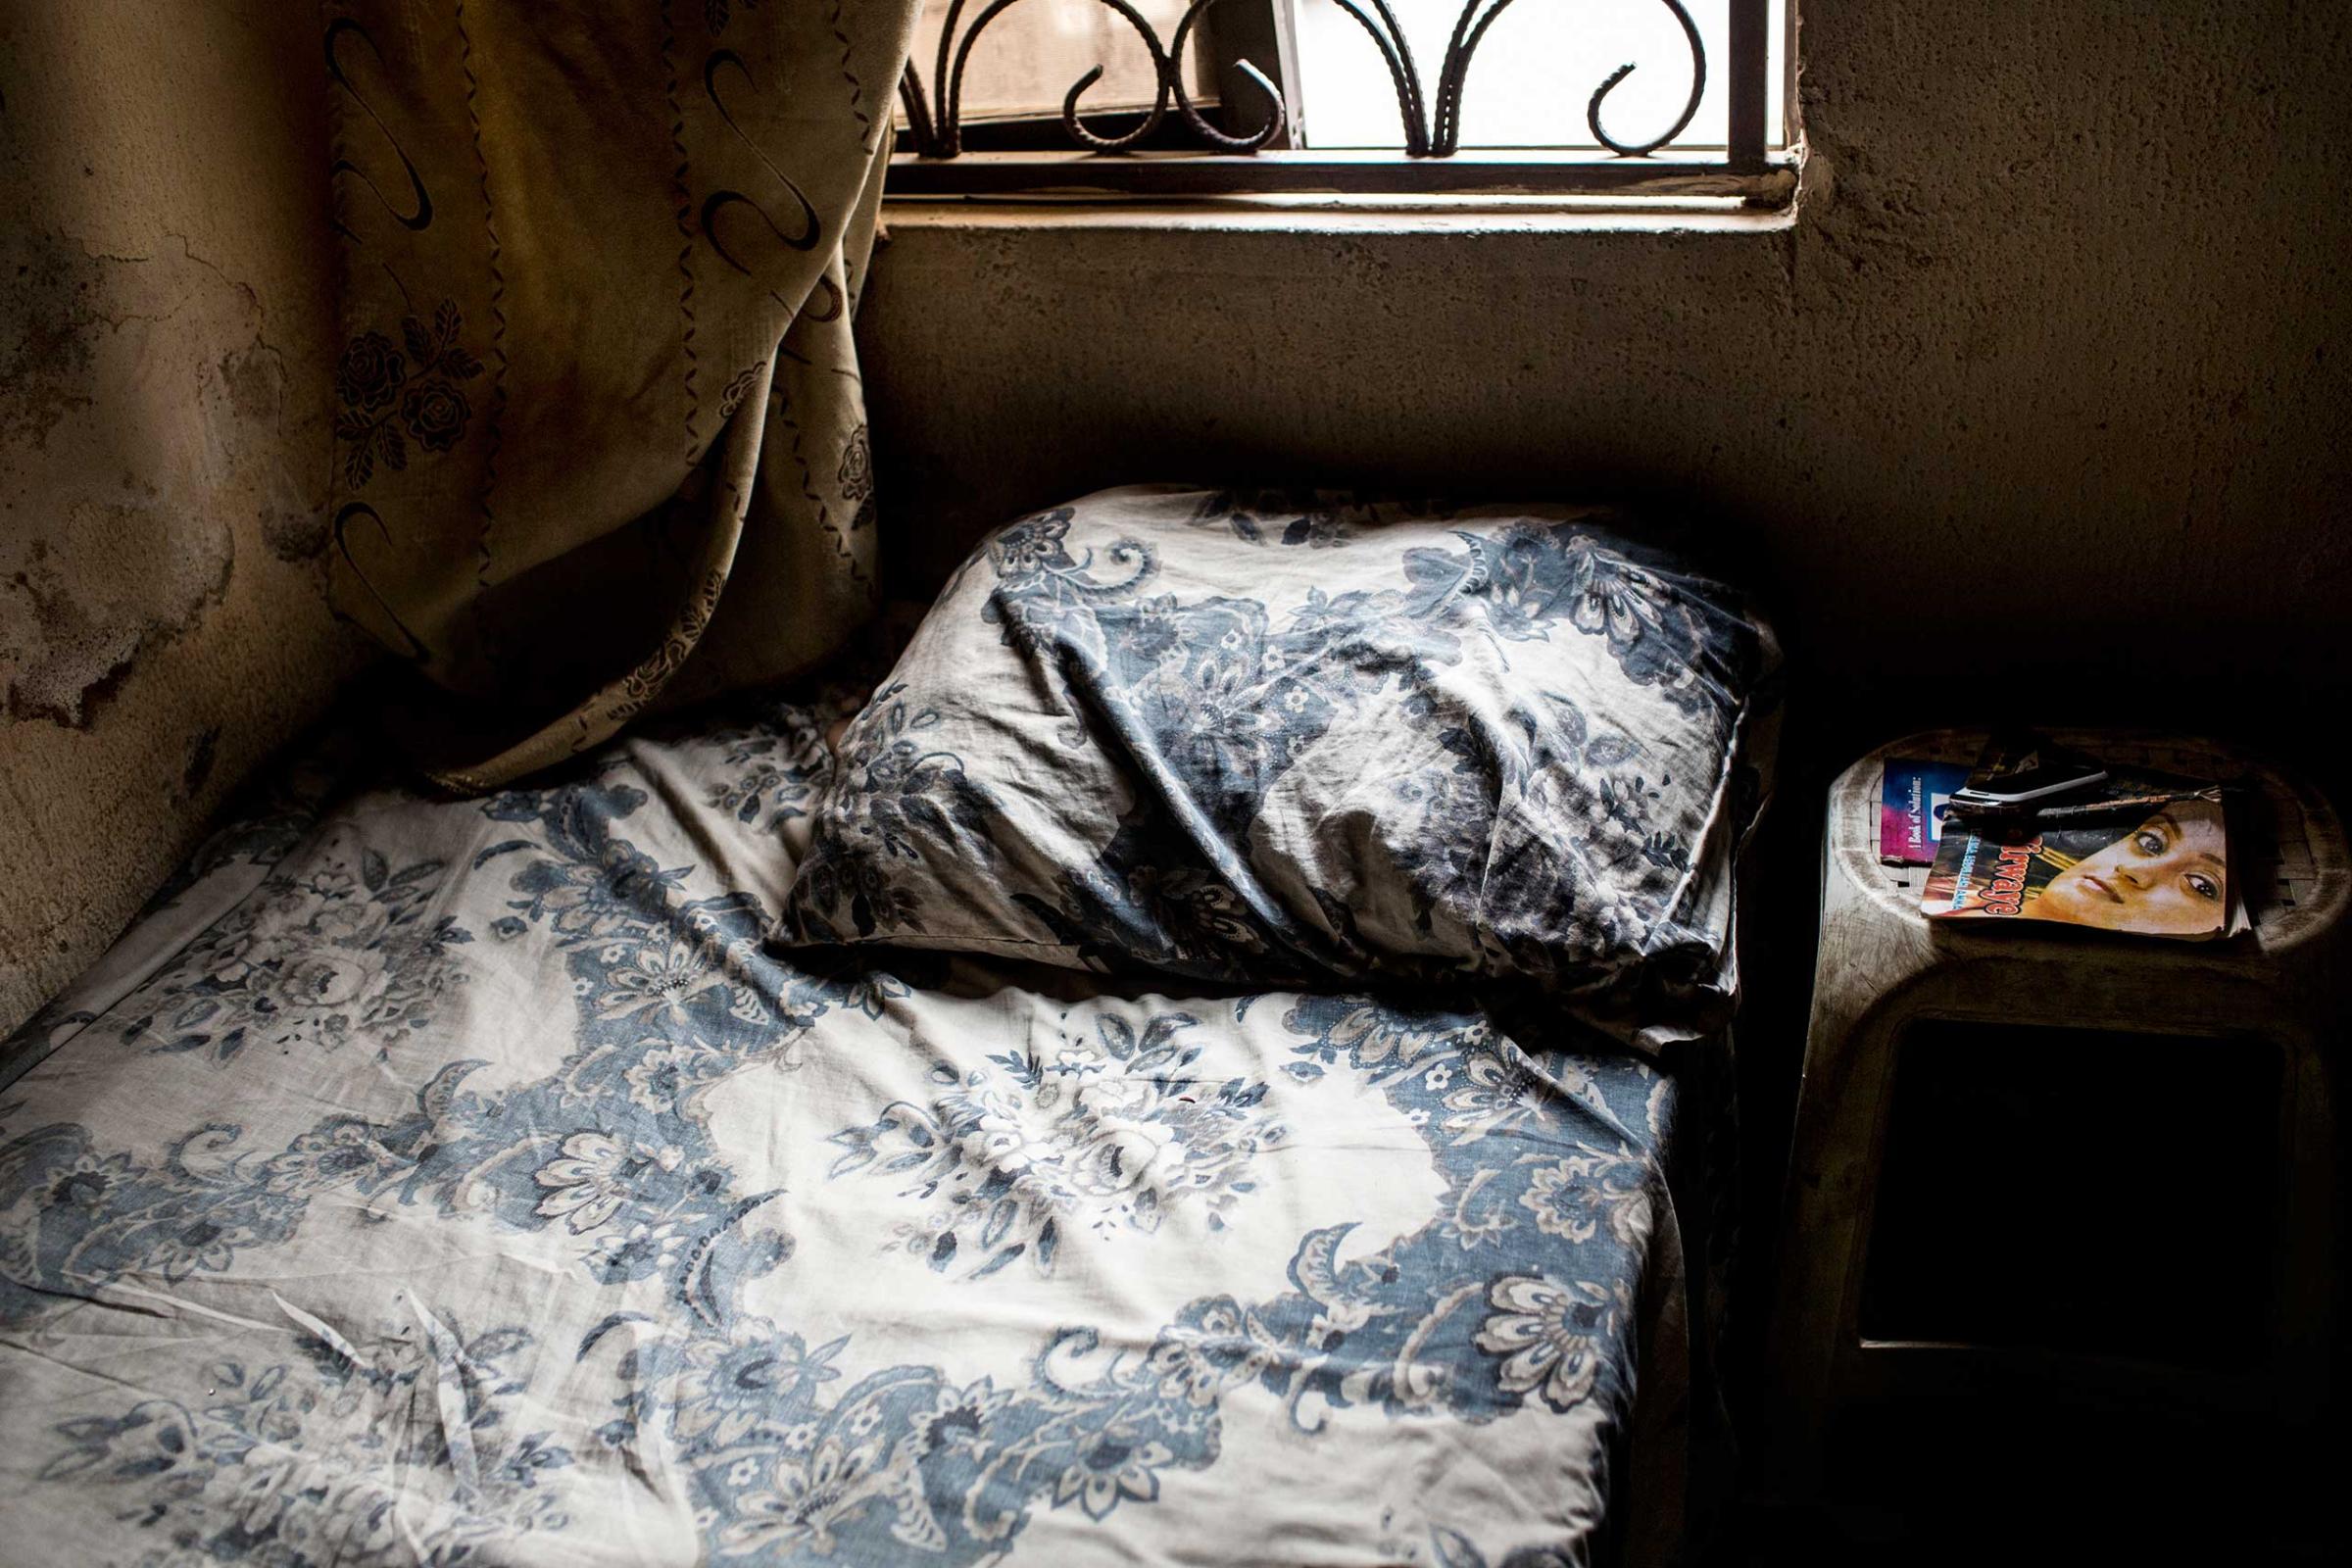 A novel sits on the bedside table of a young girl in Kano, Northern Nigeria, March 1, 2014.